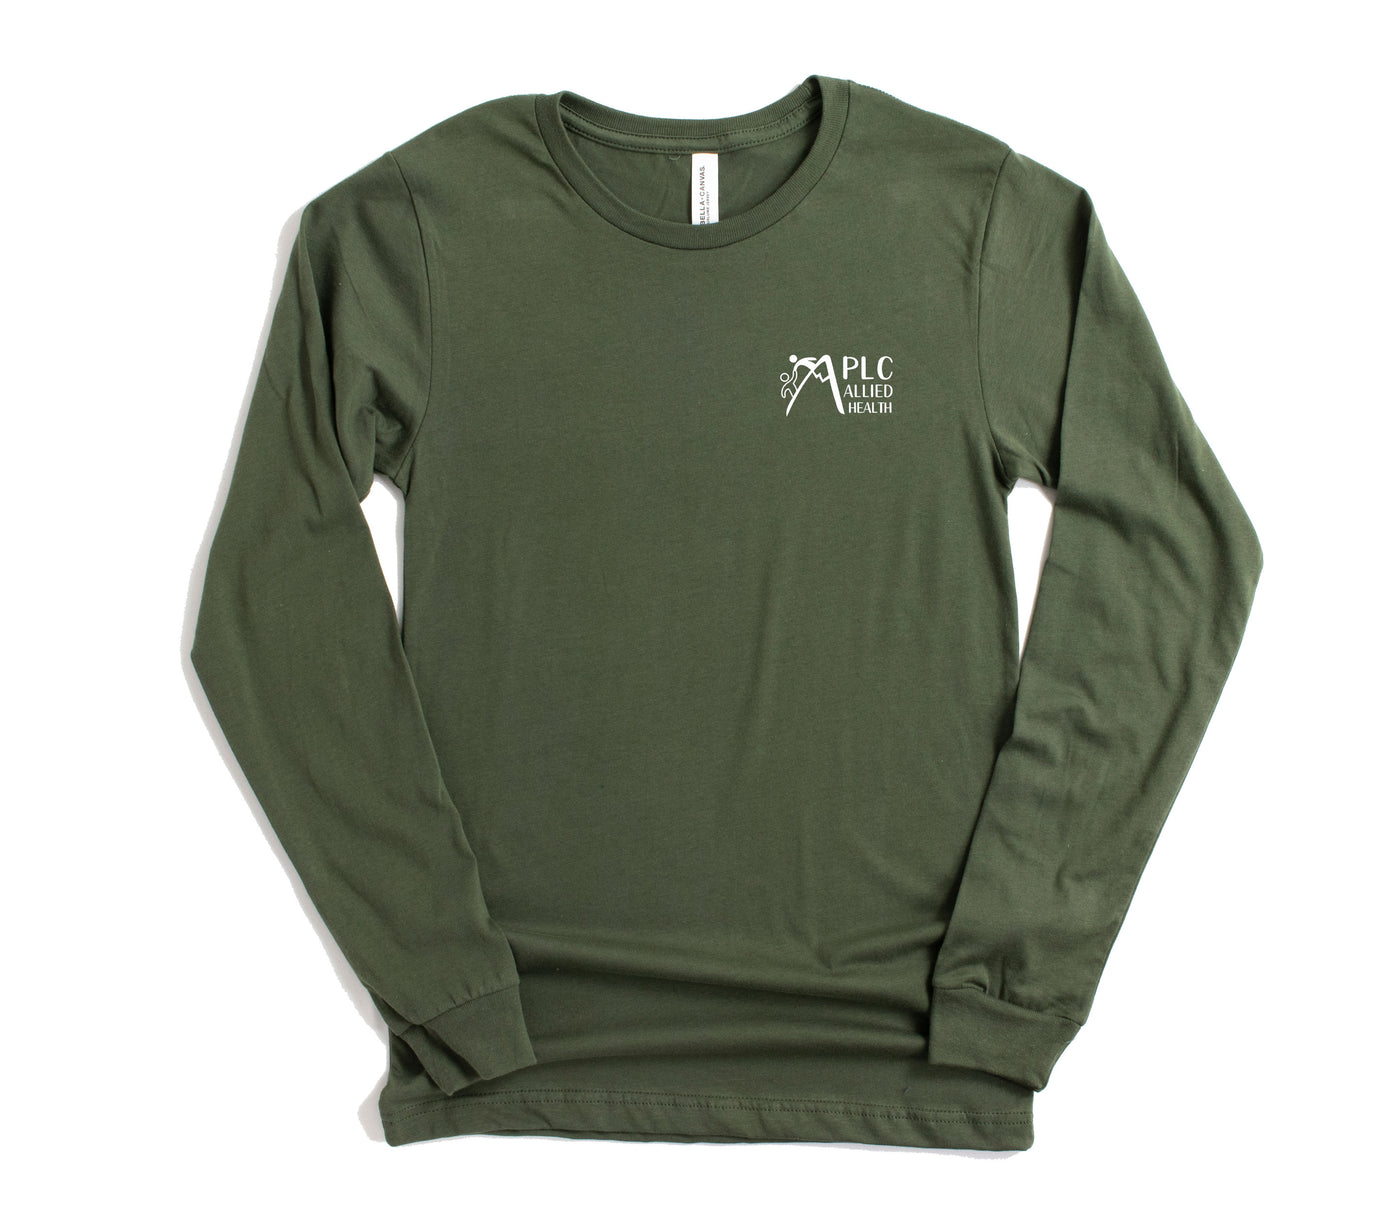 PLC Allied Health - Round 2 - Long Sleeve